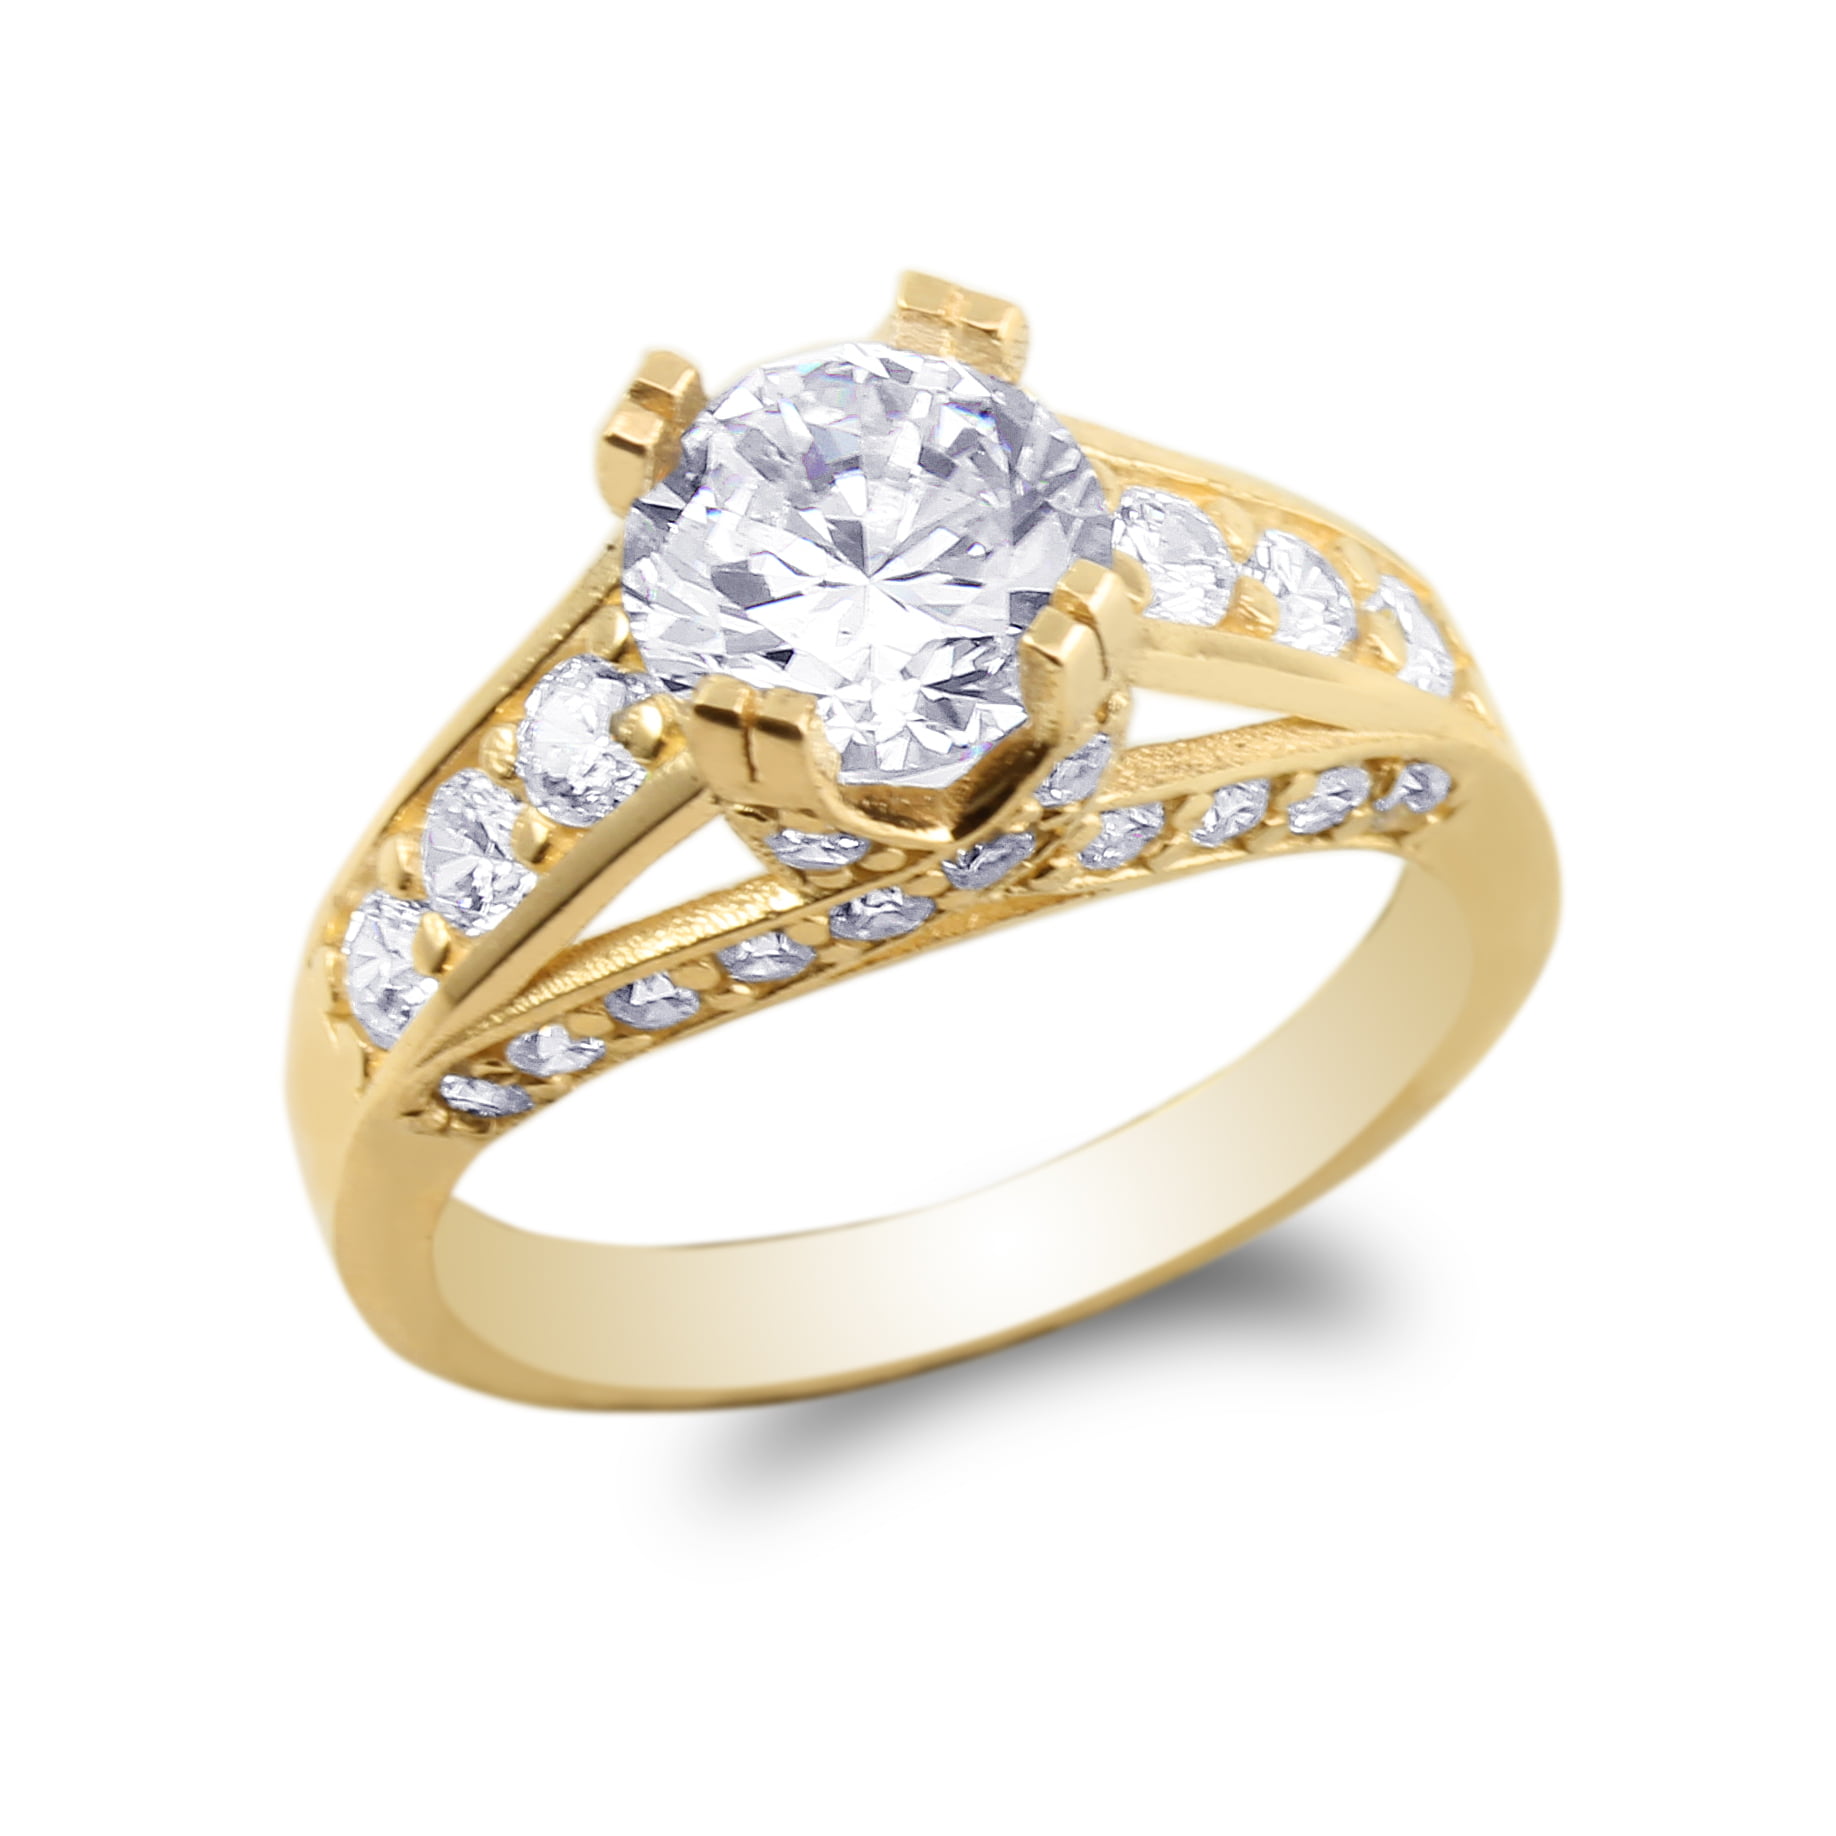 14K Yellow Gold 1.65 CT Solitaire Engagement Wedding Ring Round Cut Diamond 